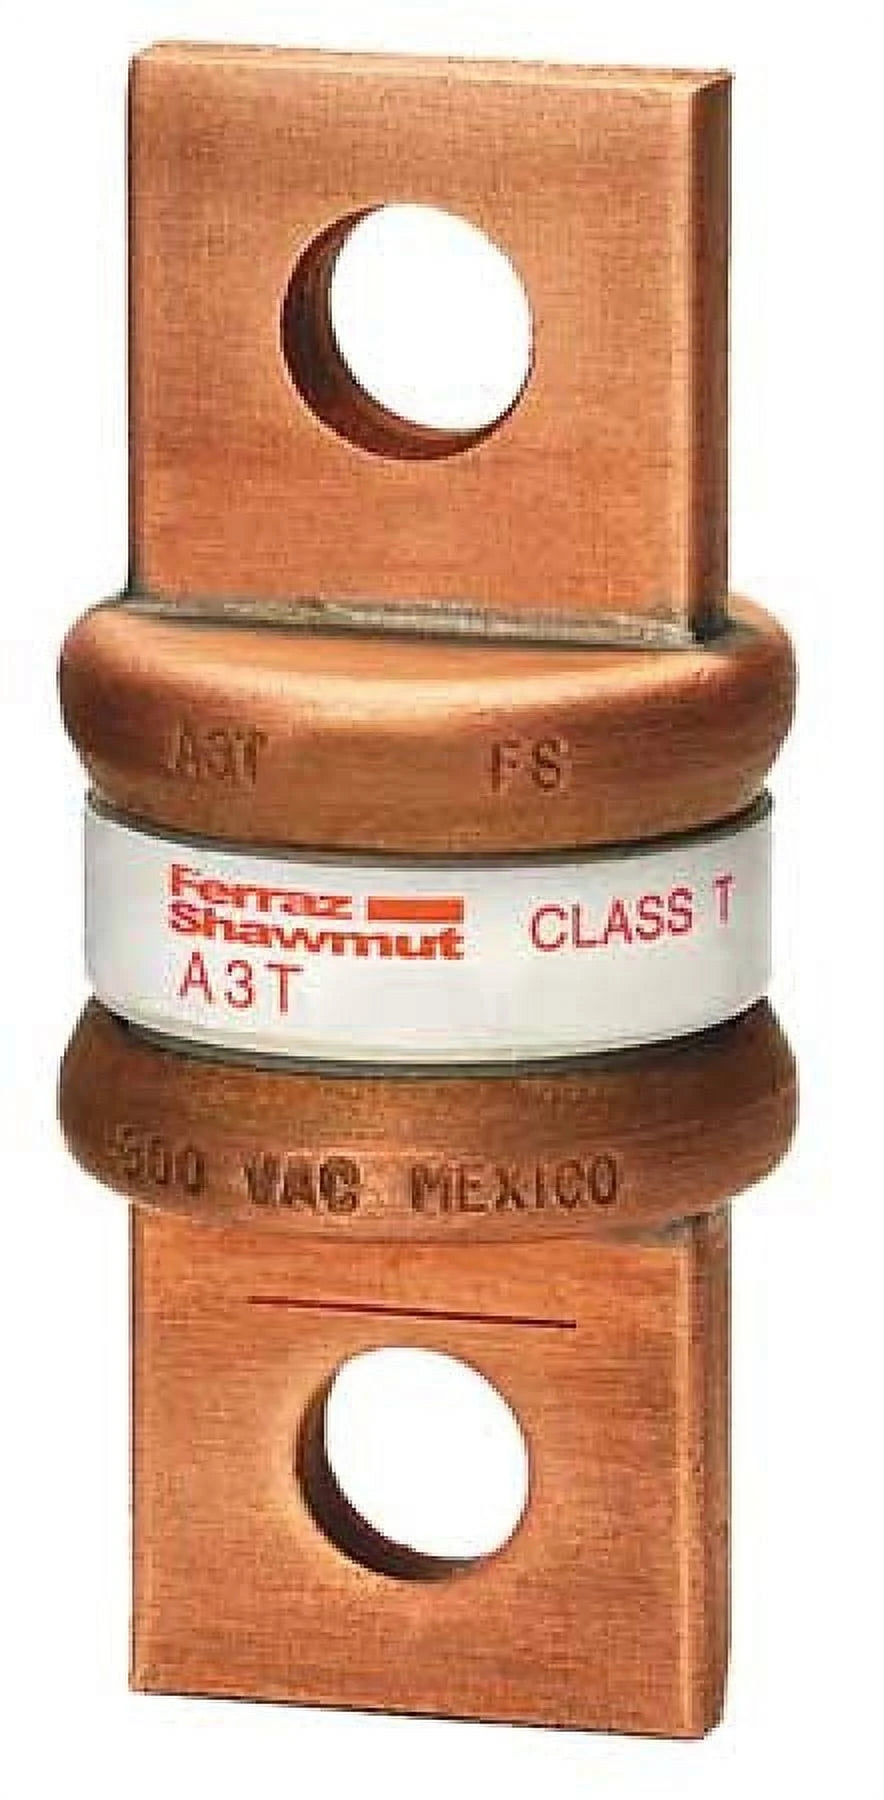 Fuse Amp-Trap® 300V 175A Fast-Acting Class T A3T Series